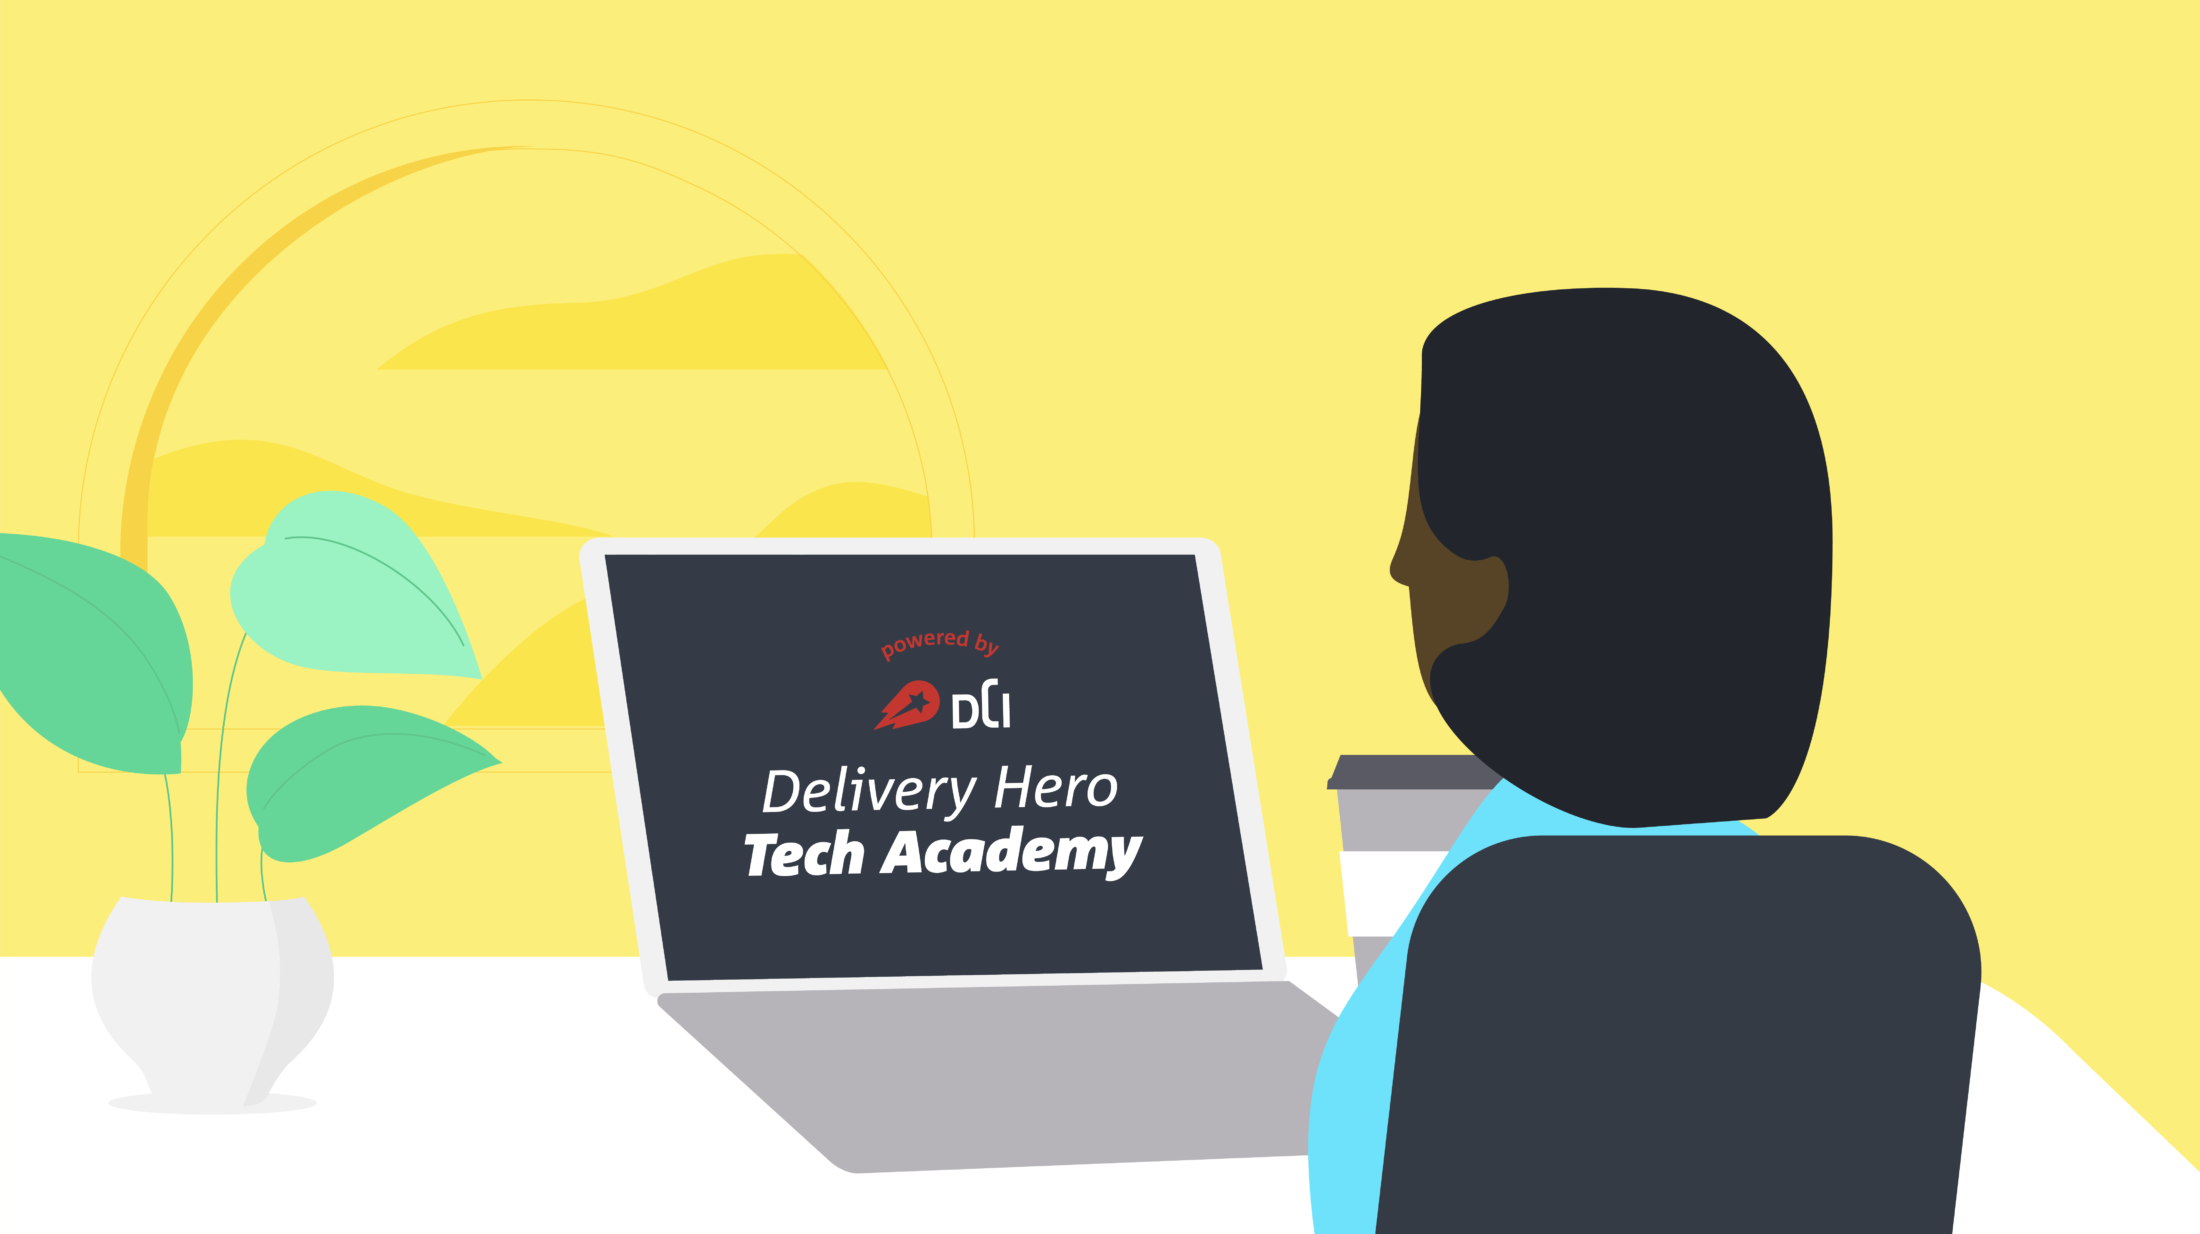 Decoding the program: An inside look at the Delivery Hero Tech Academy